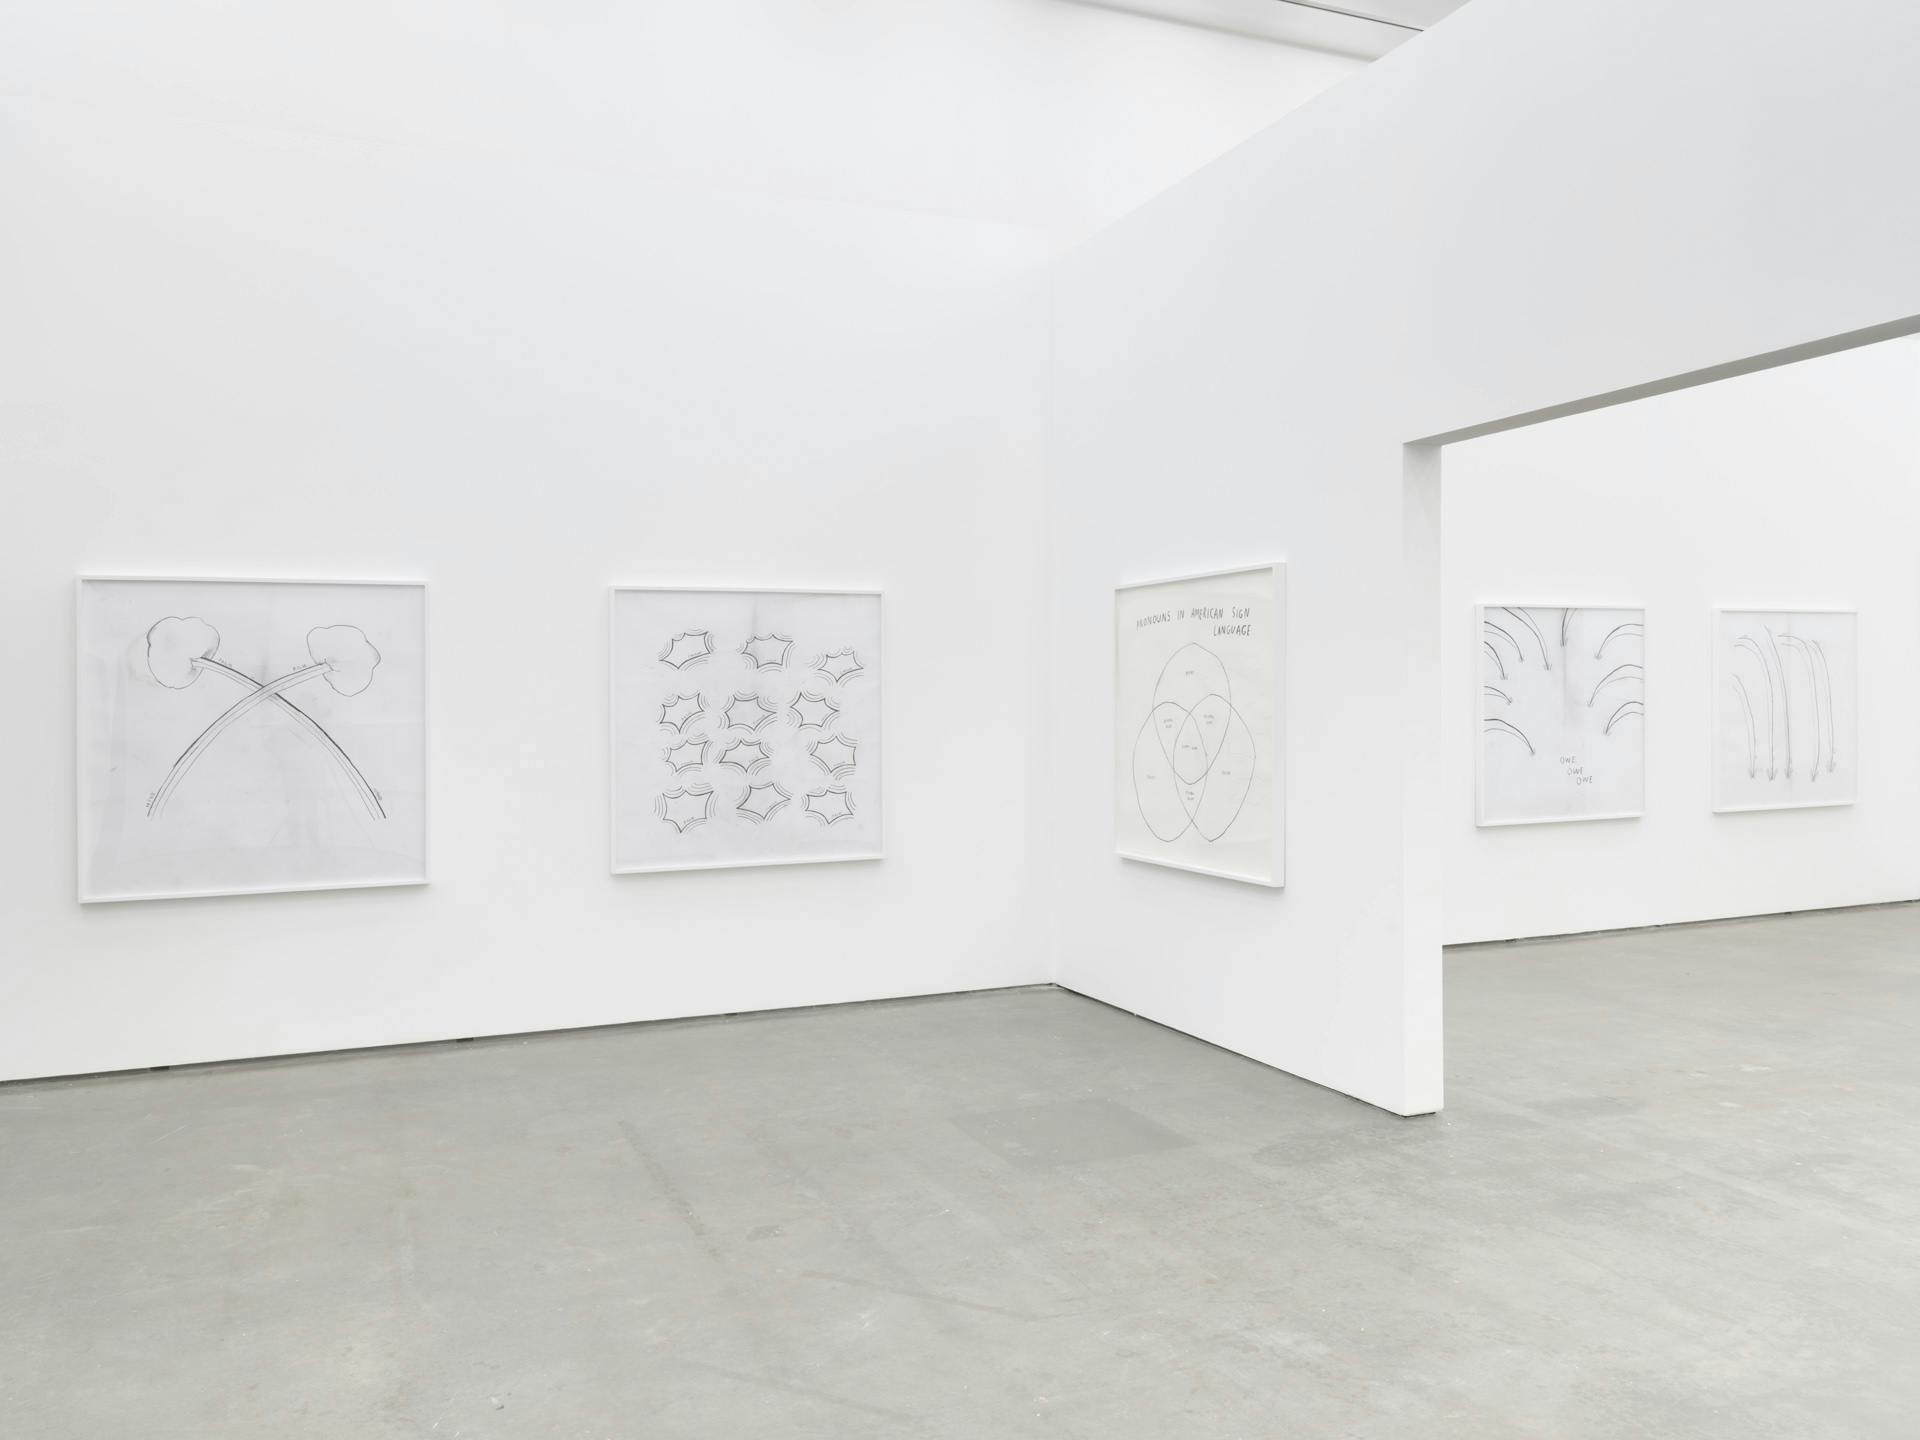 Four line drawings by Christine Sun Kim on a white wall bisected by a wall with an opening, which also has a drawing by Kim on it.